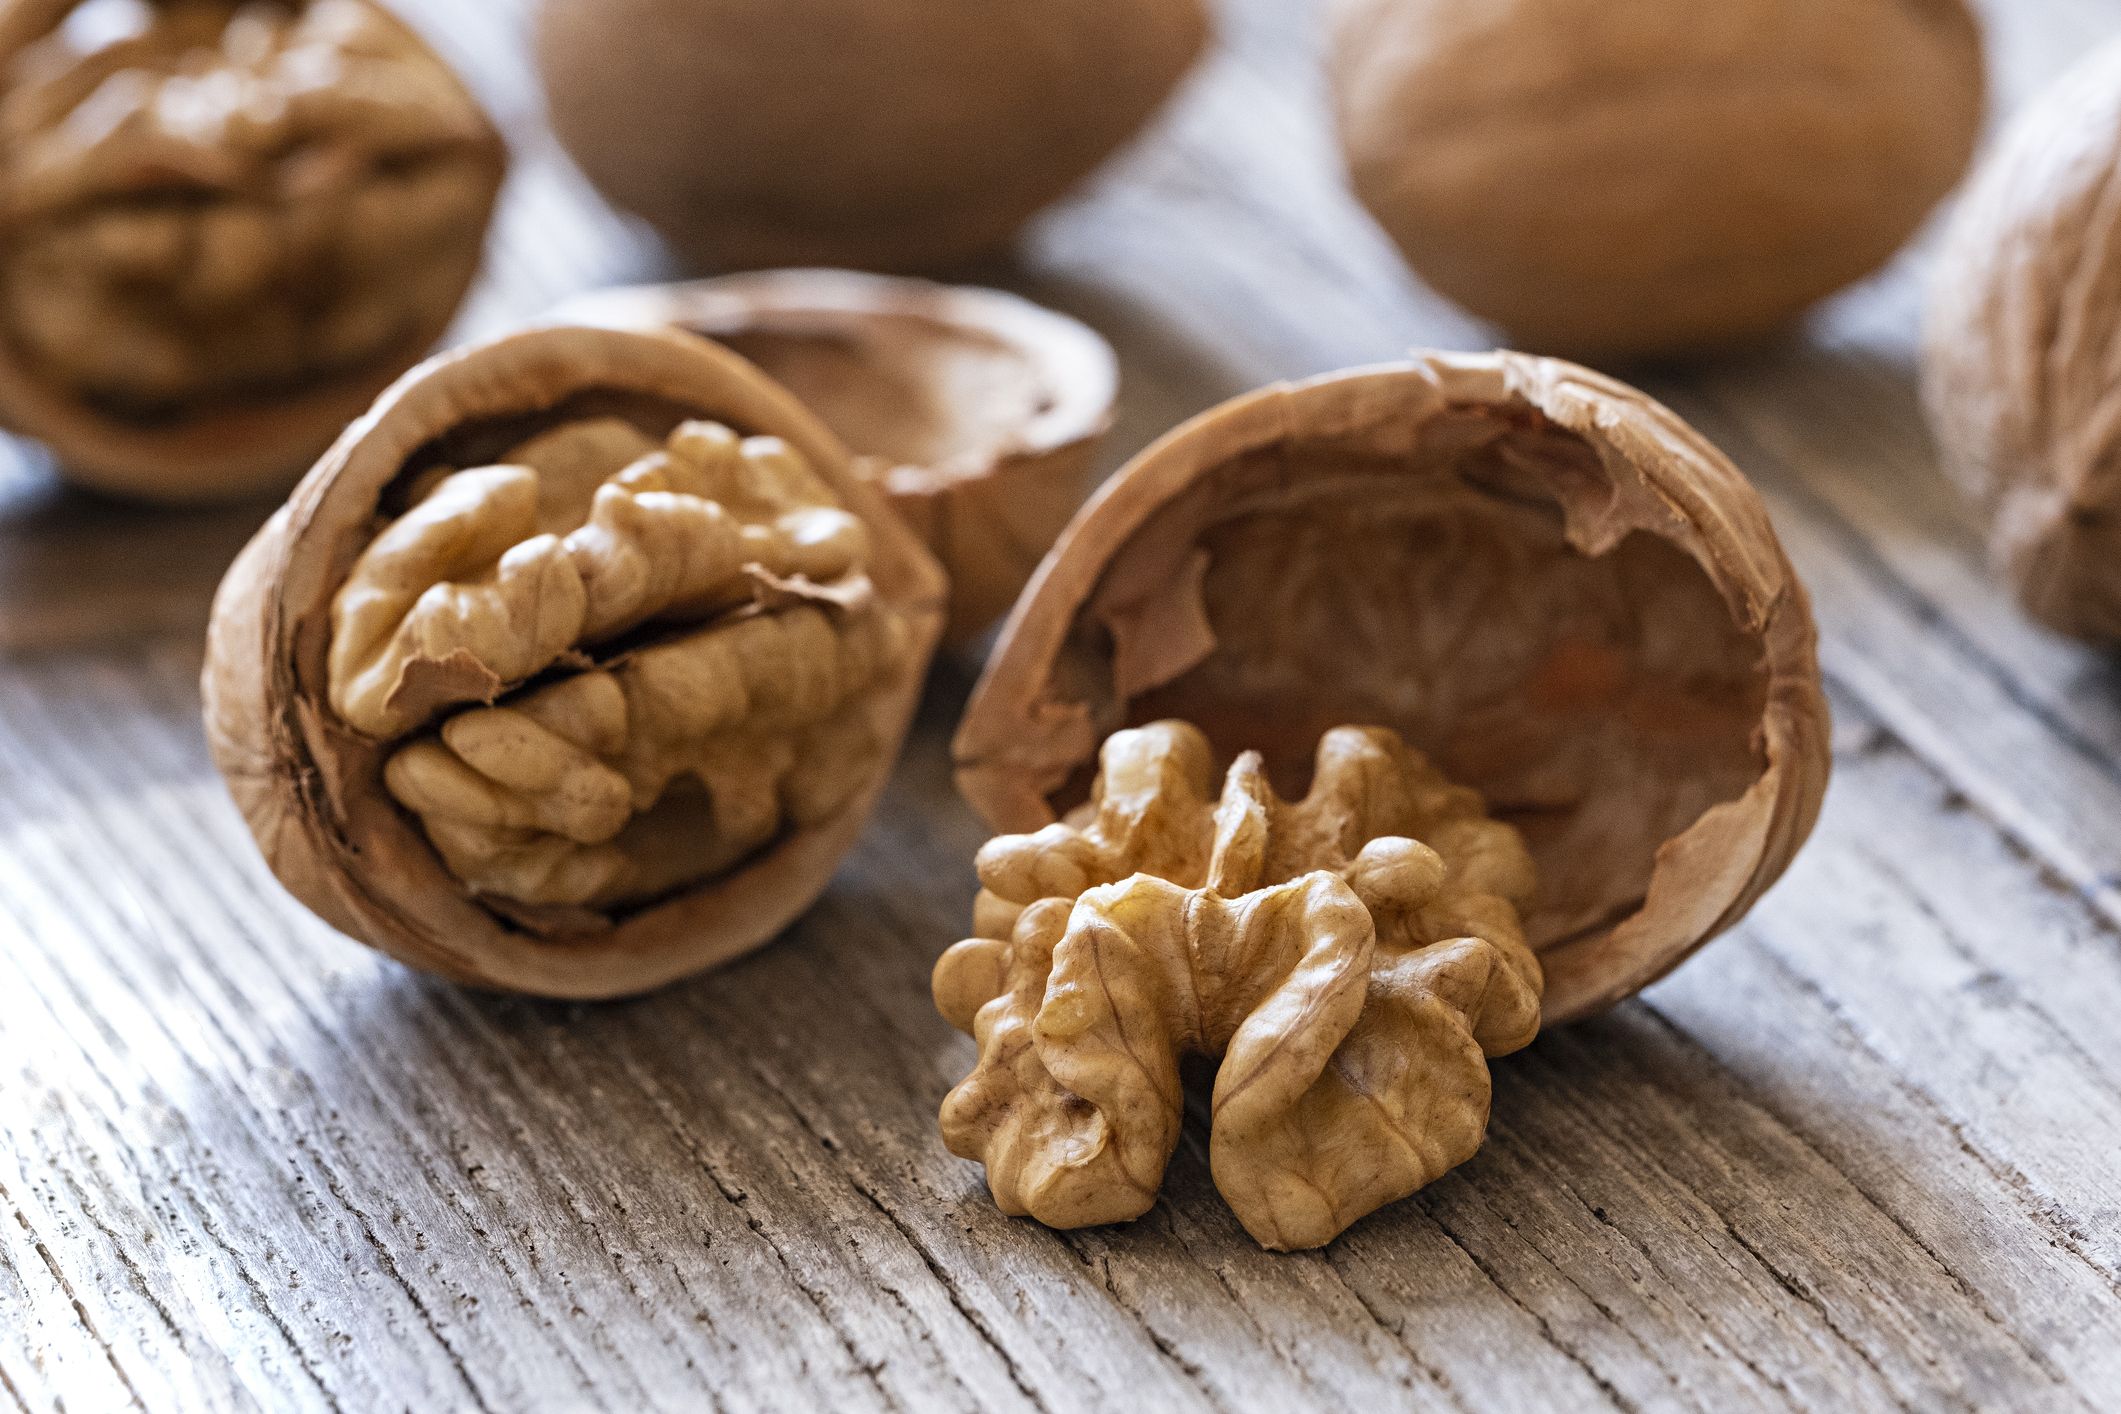 The health benefits of walnuts, and why runners should eat more